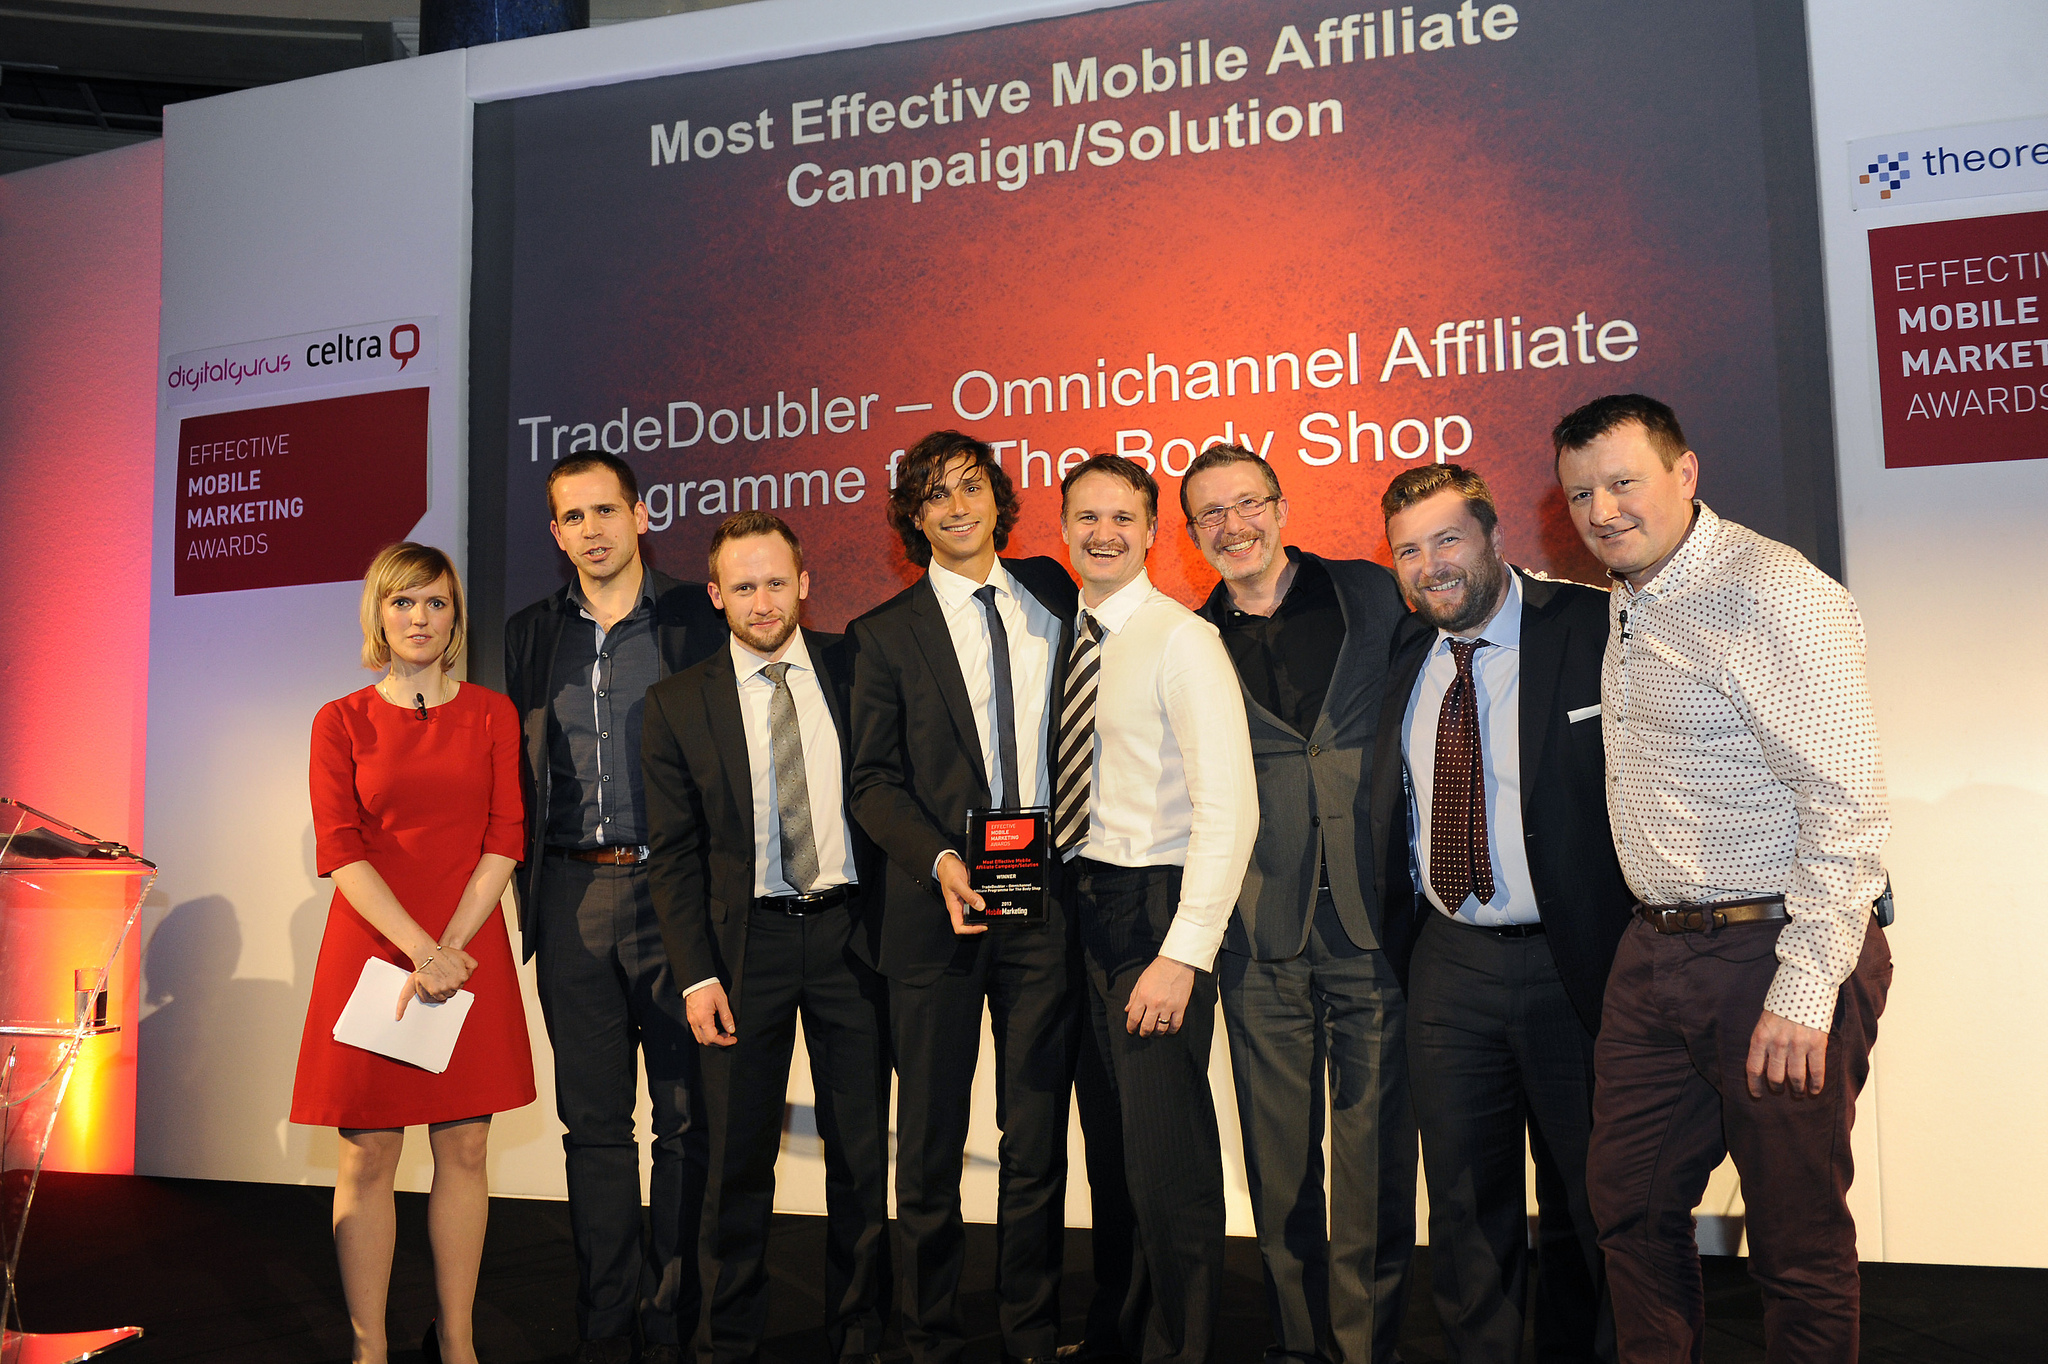 Effective Mobile Marketing Awards – 2013's Winners: Affiliate Campaign